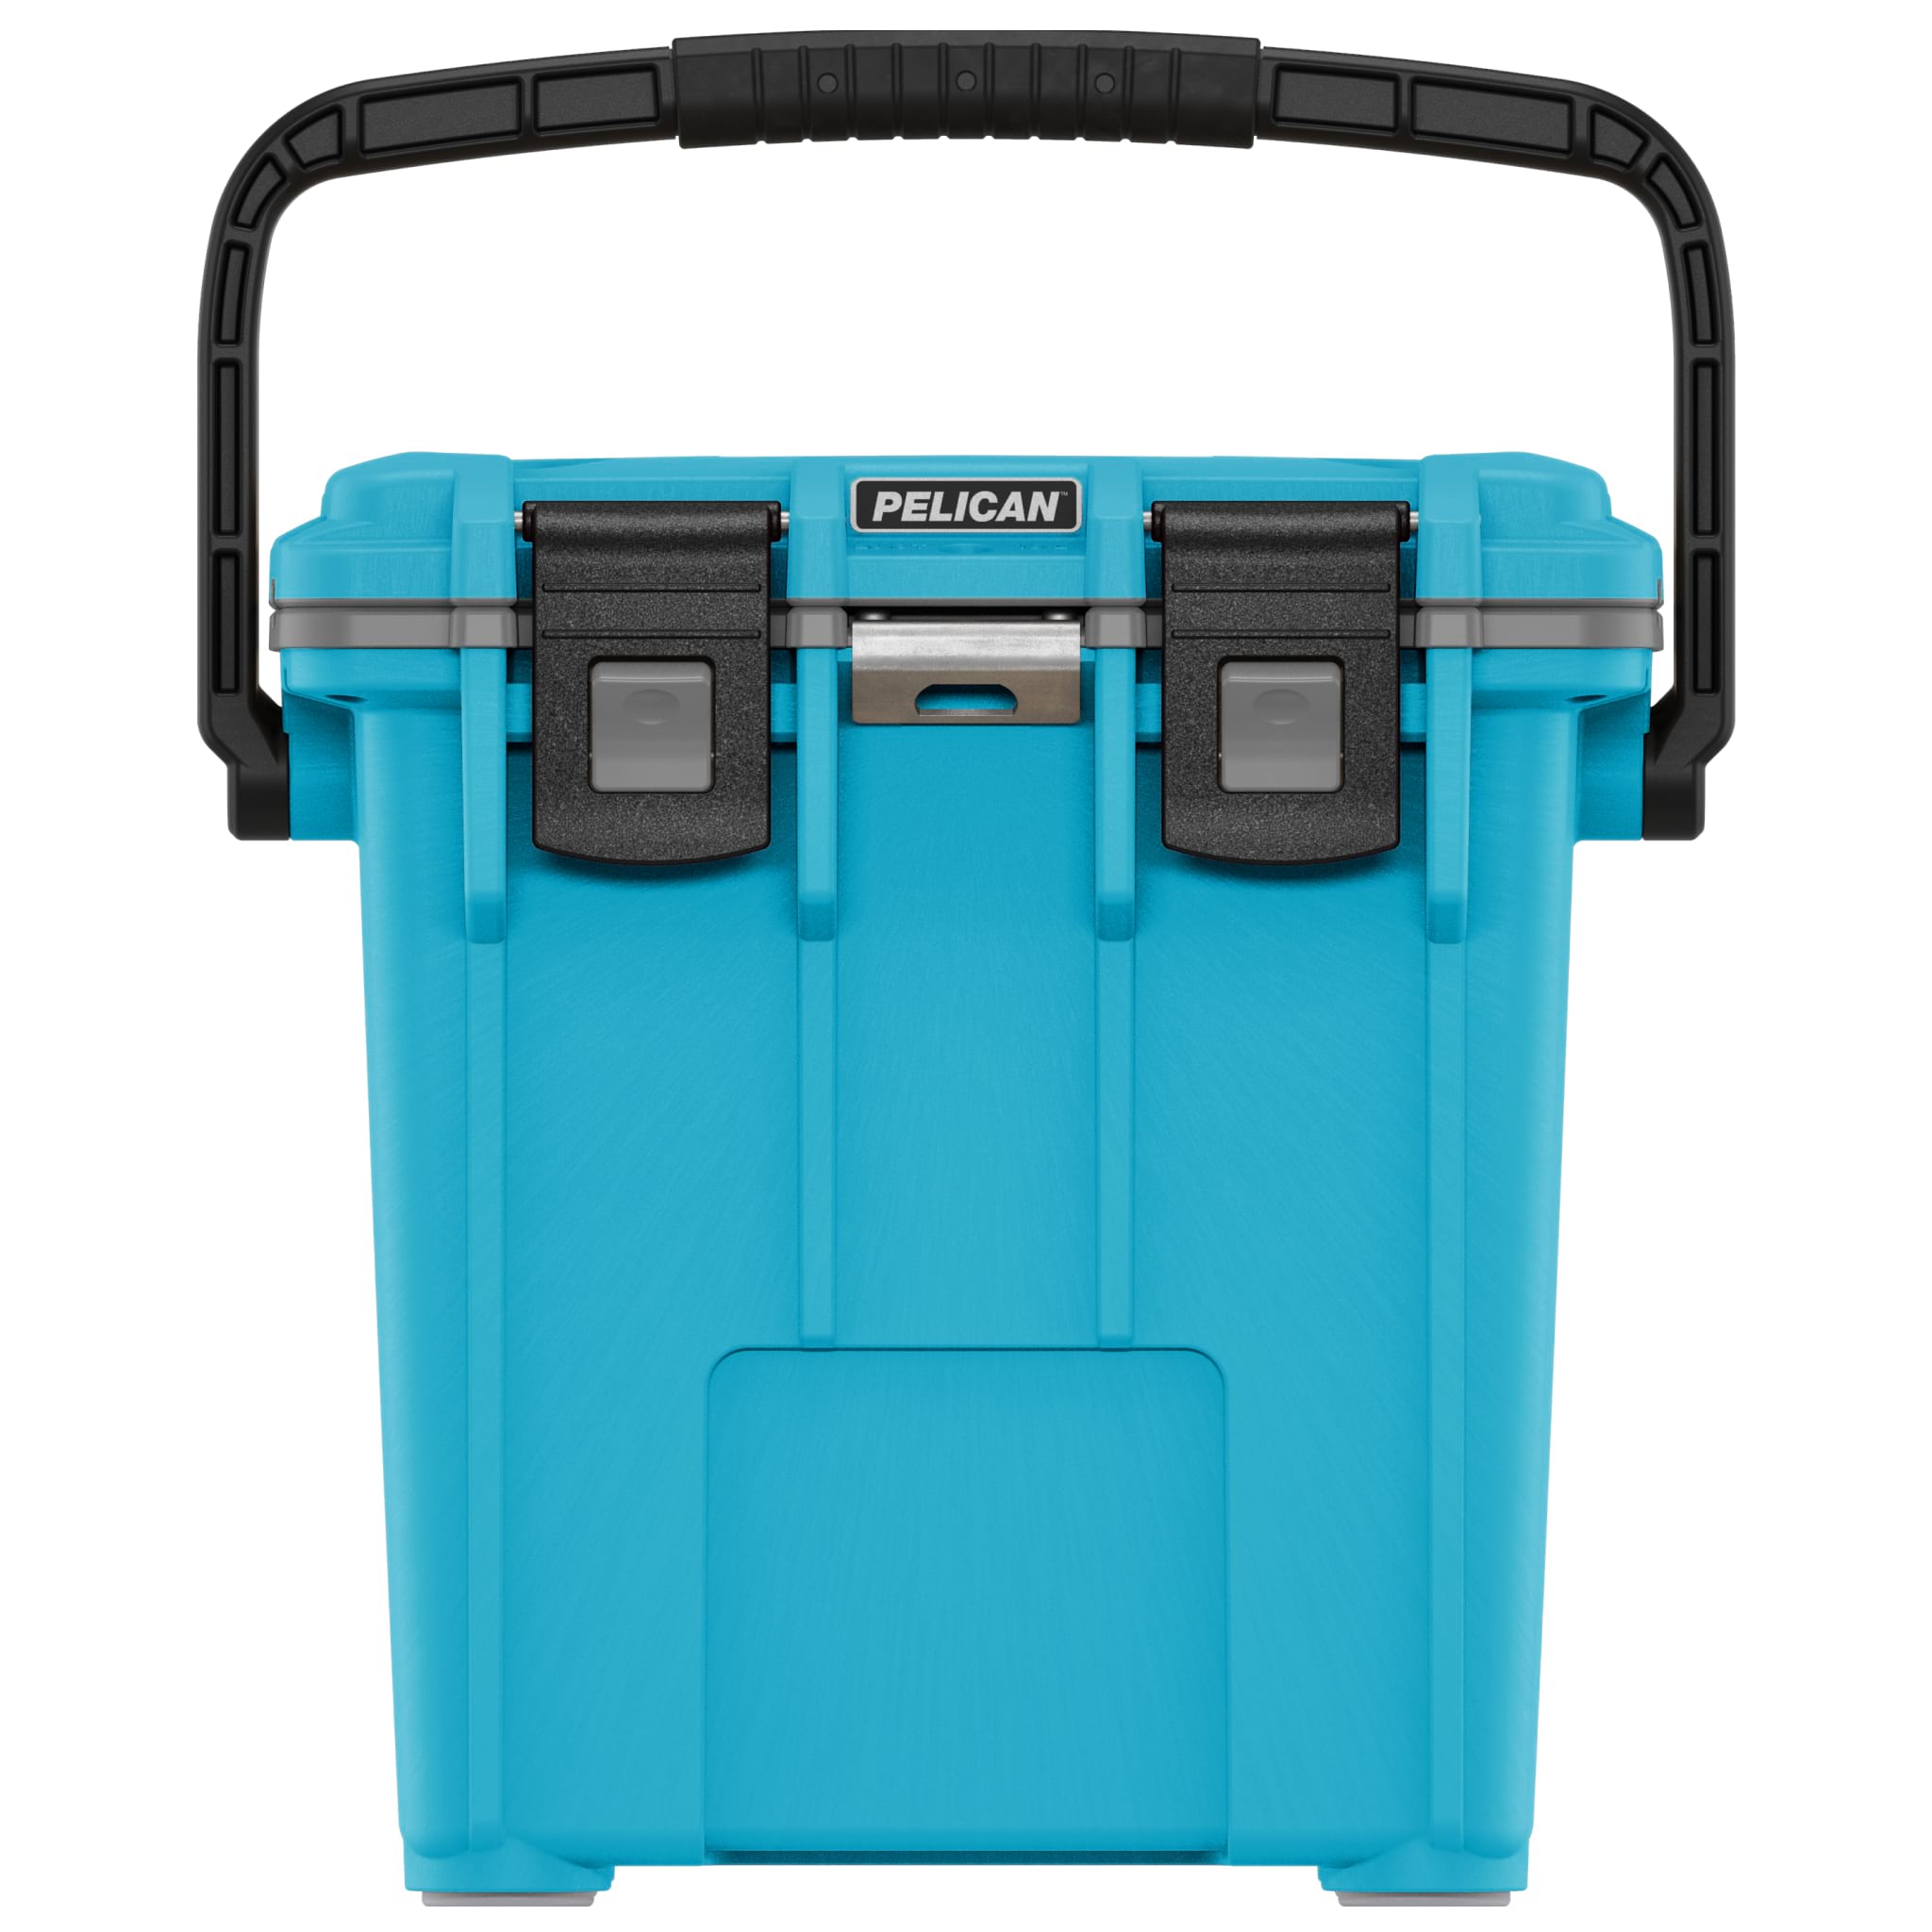 Pelican 20Q Cooler Pacific Blue / GRAY 20Q-7-PACBLUGRY from